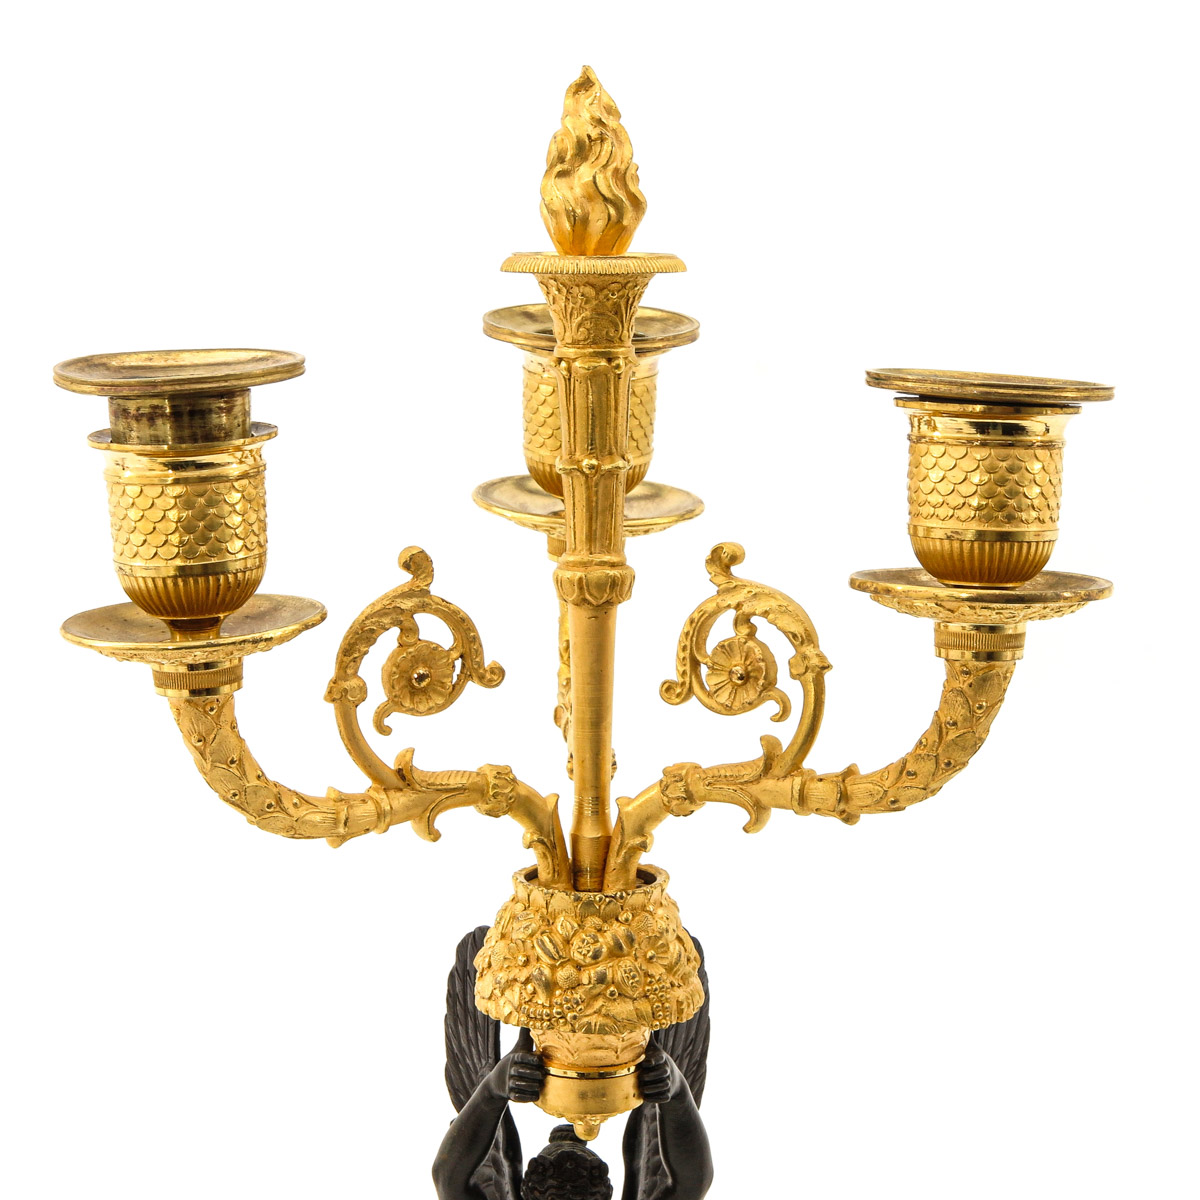 A Pair of Empire Period Candlesticks - Image 7 of 10